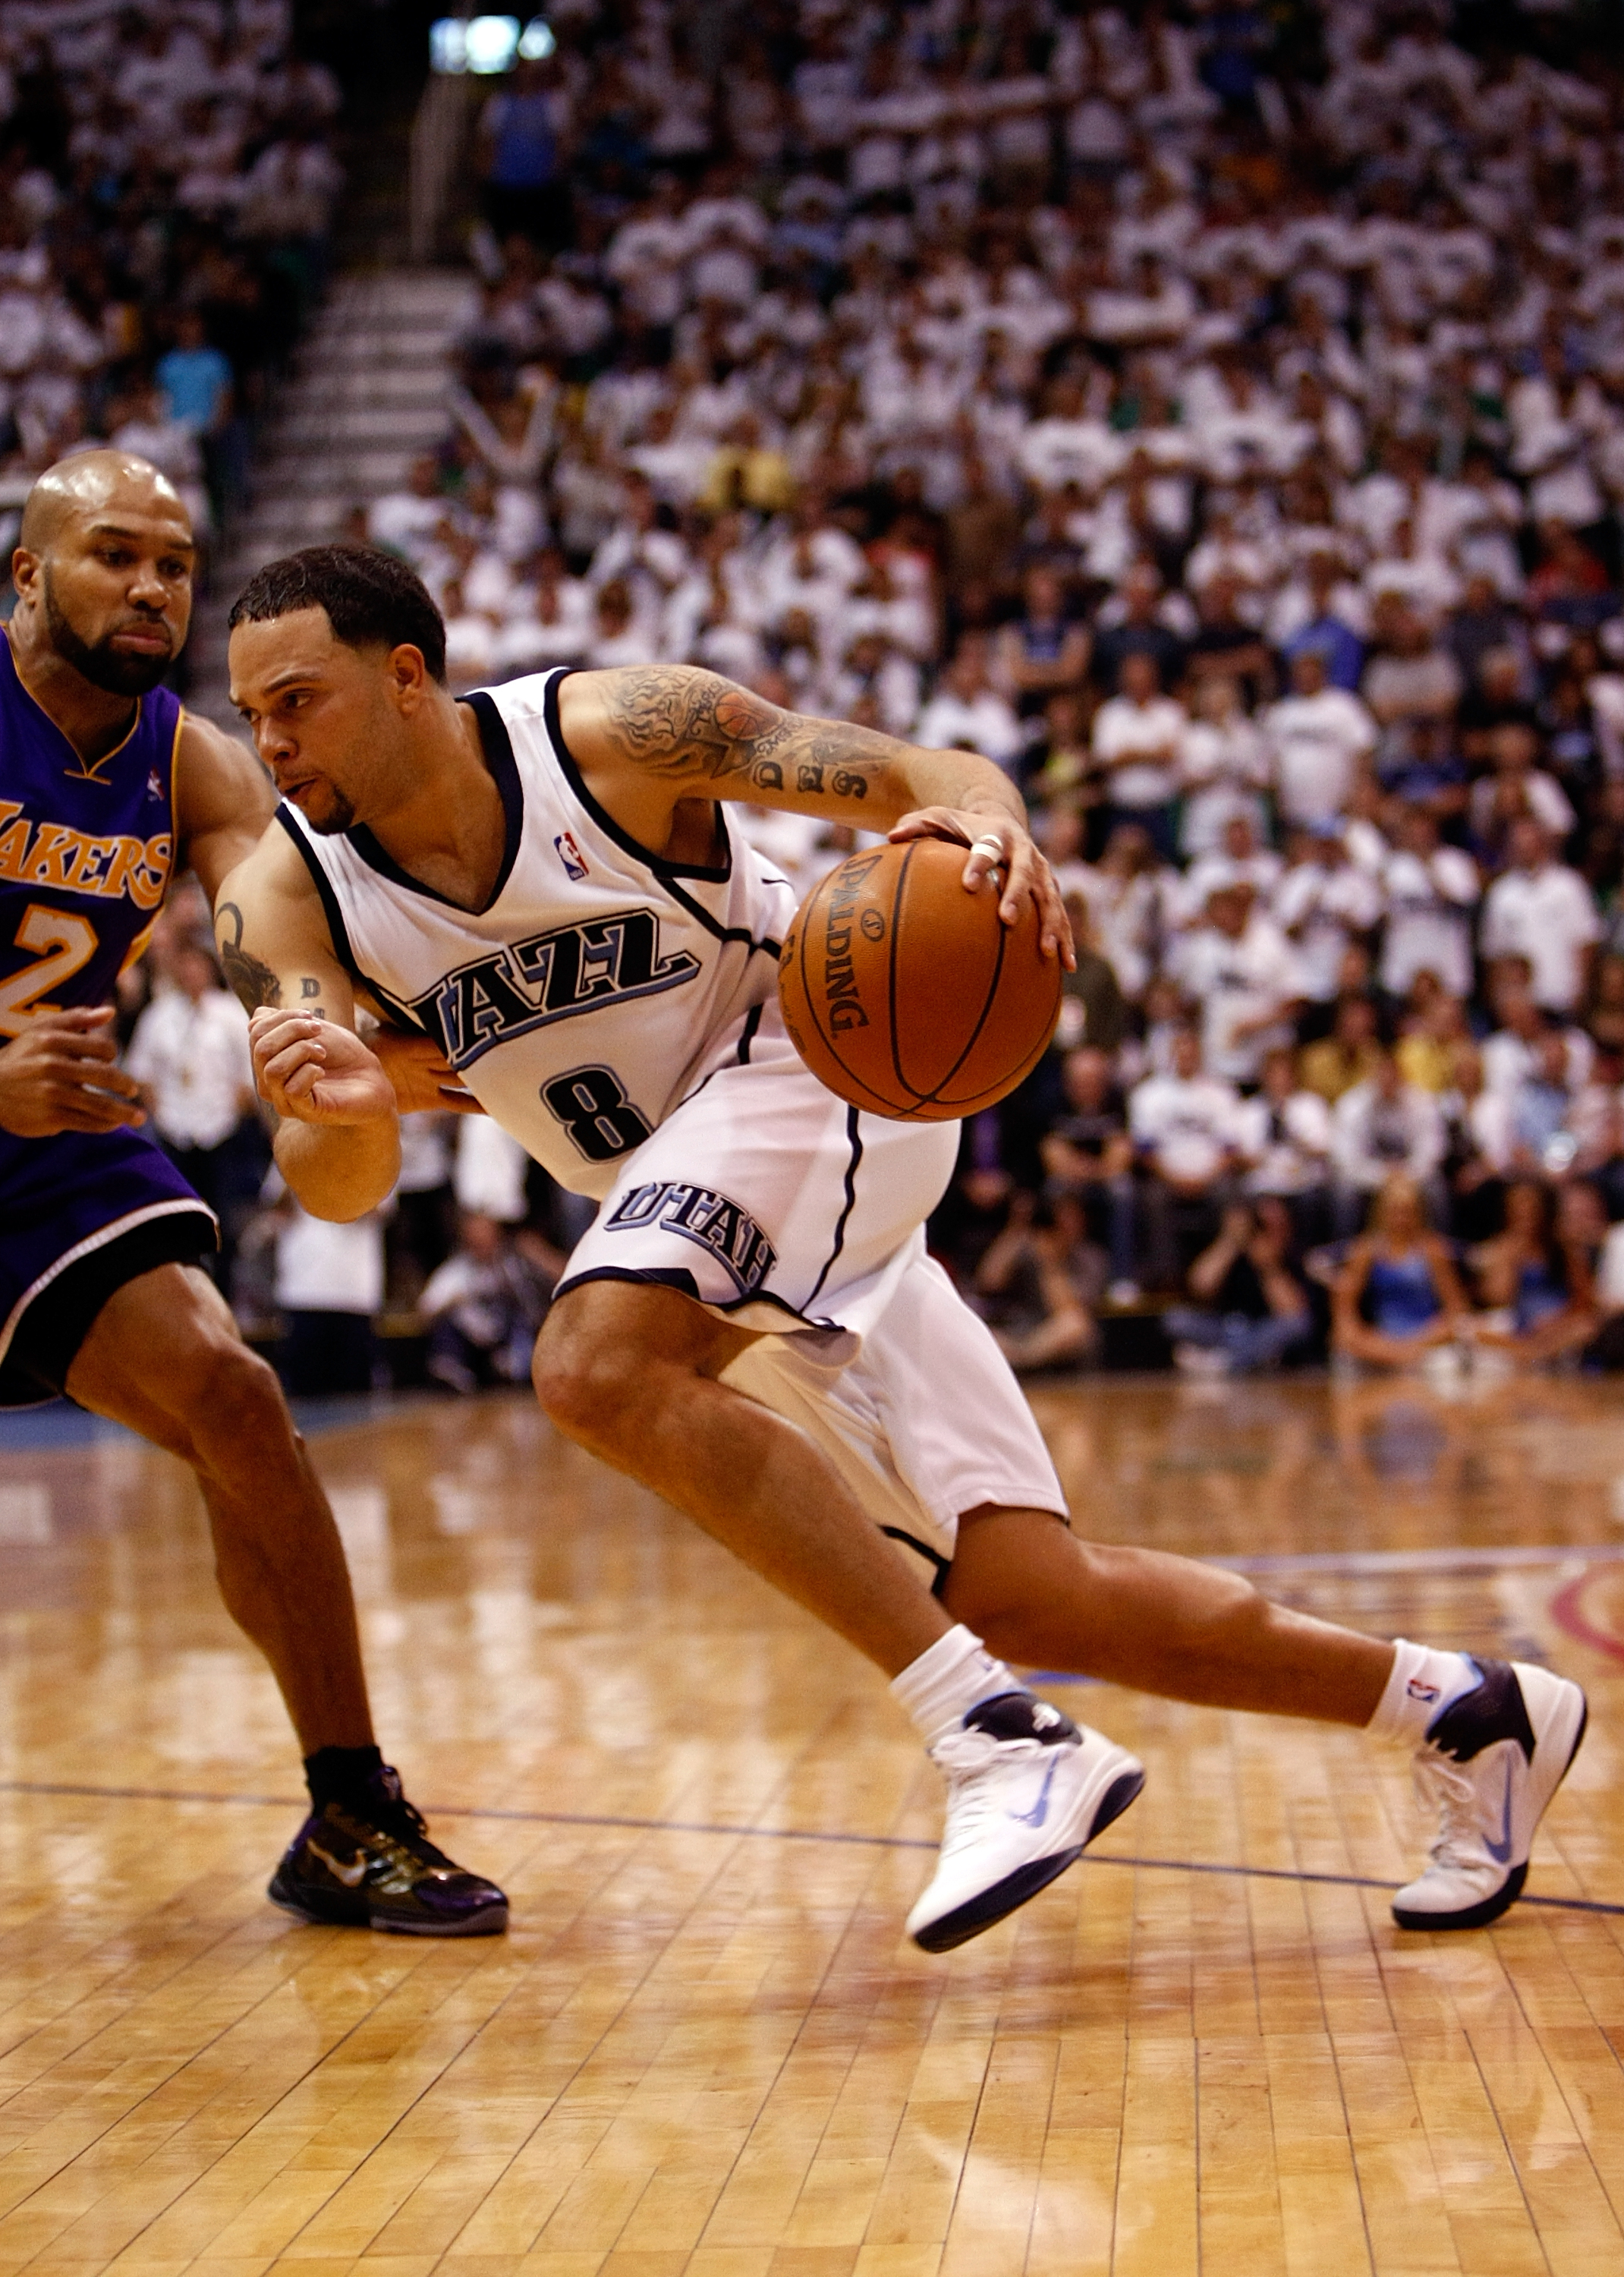 SALT LAKE CITY - MAY 08:  Deron Williams #8 of the Utah Jazz drives by Derek Fisher #2 of the Los Angeles Lakers during Game Three of the Western Conference Semifinals of the 2010 NBA Playoffs on May 8, 2010 at Energy Solutions Arena in Salt Lake City, Ut